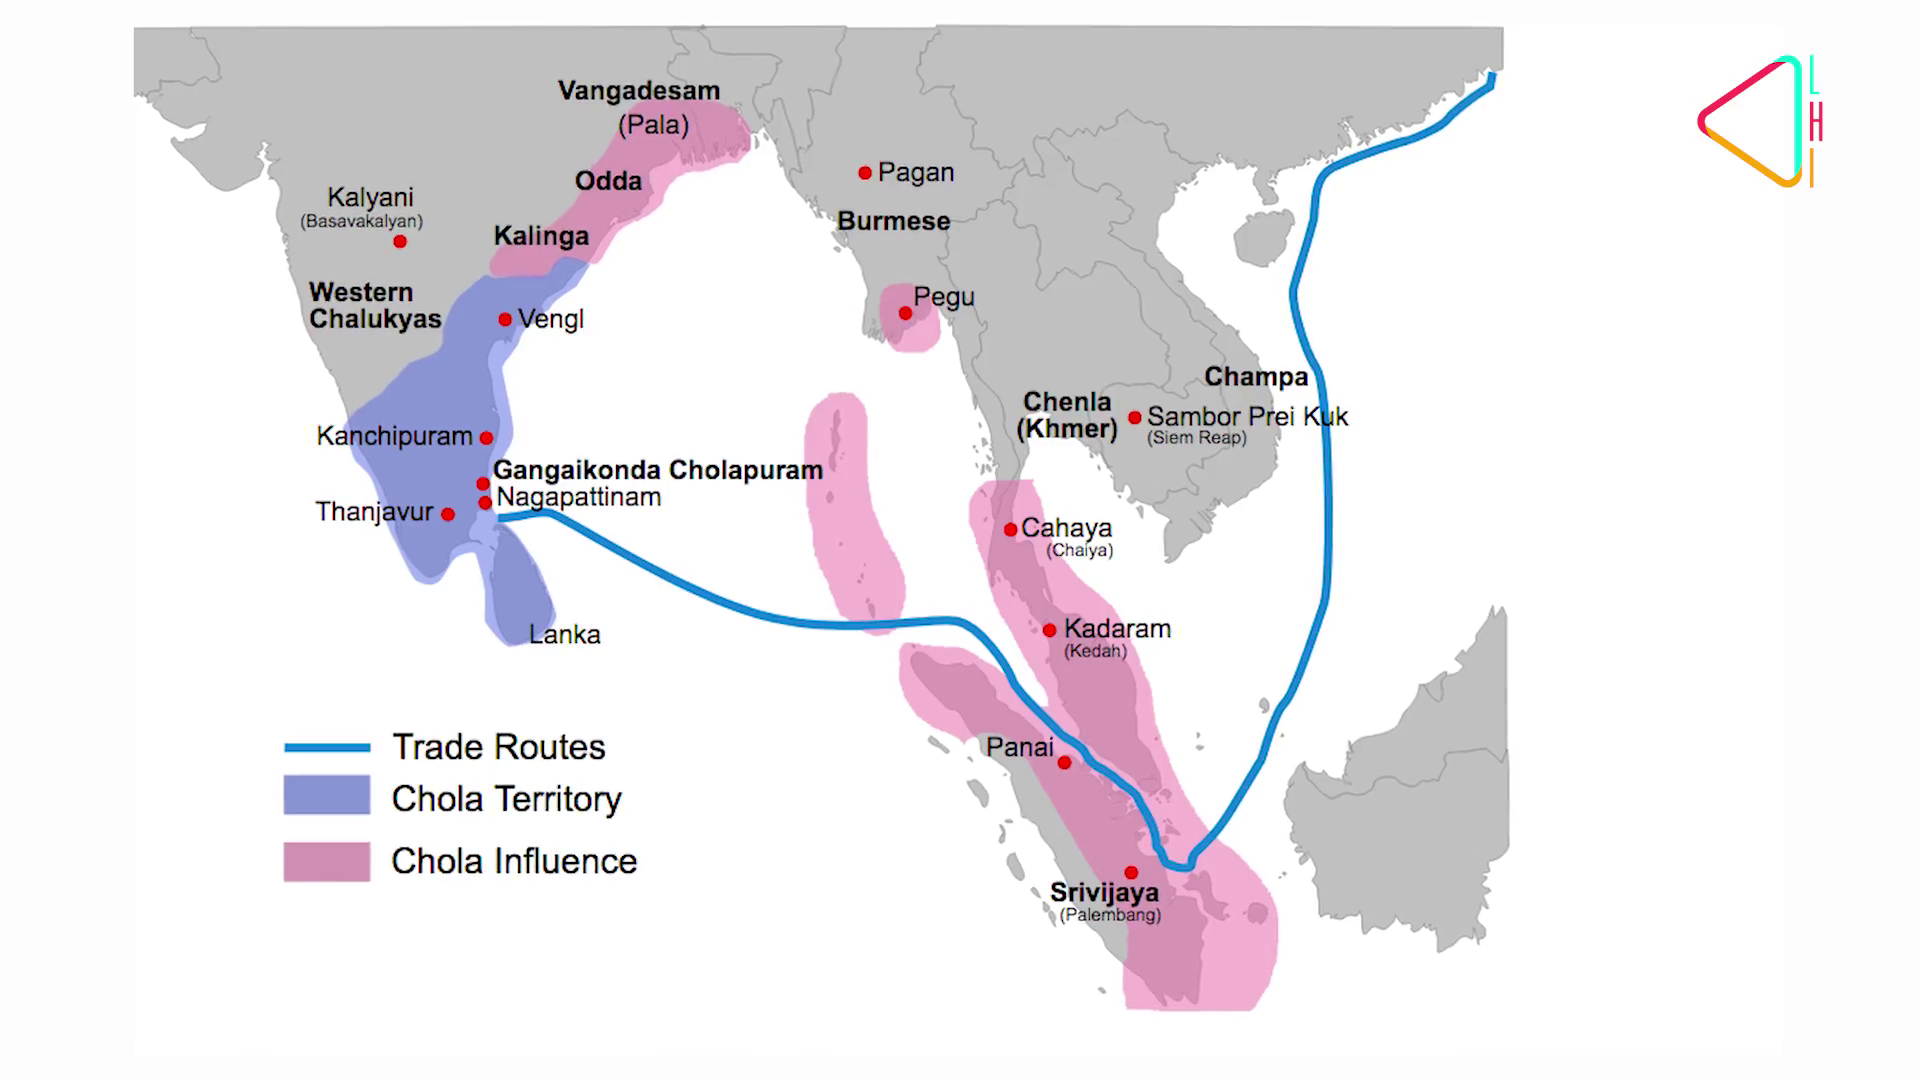 The expanse of the Chola empire